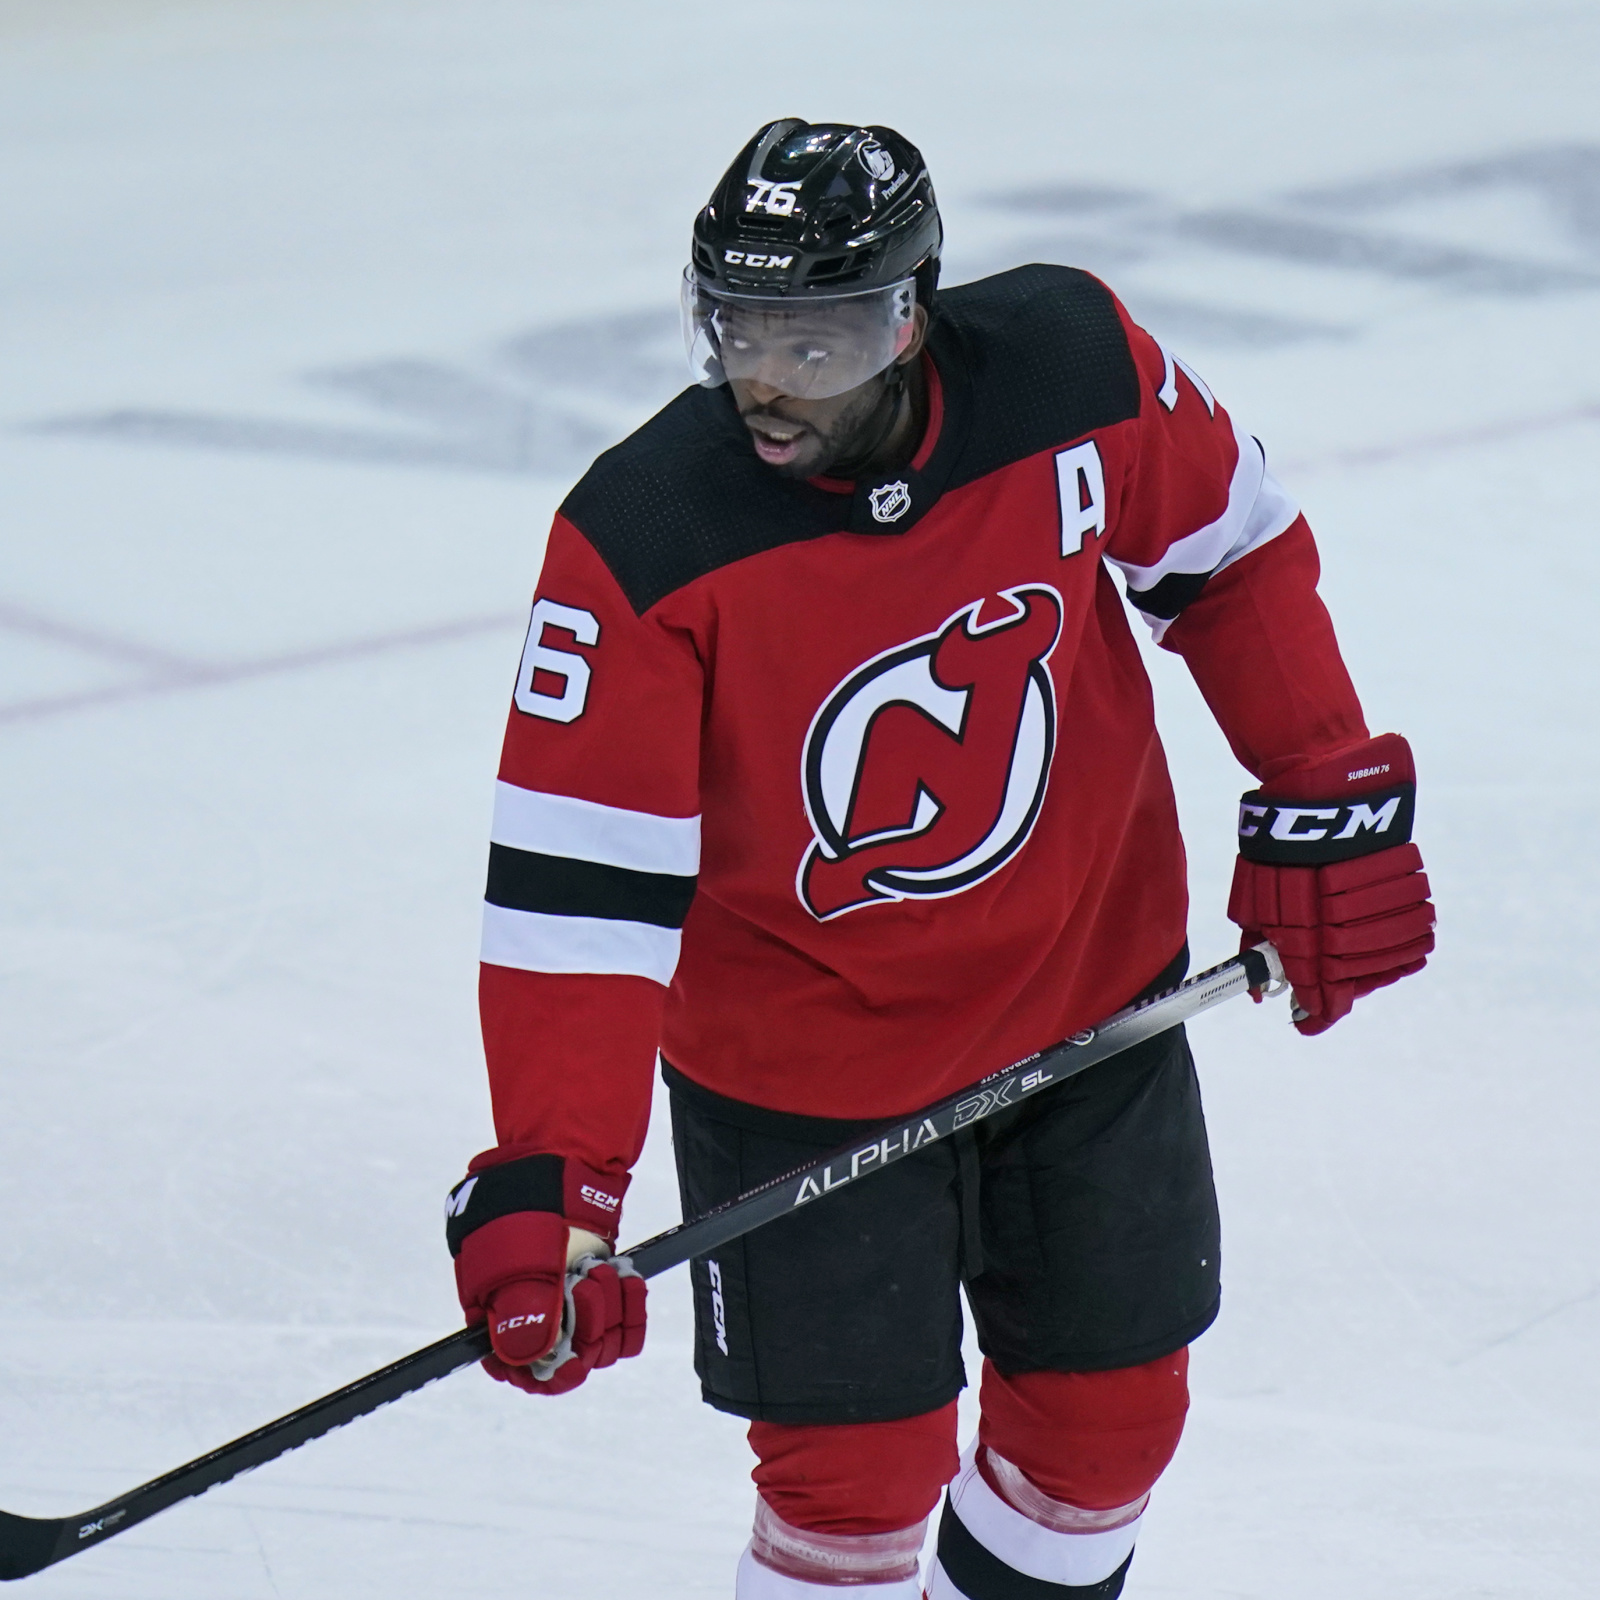 The New Jersey Devils are reportedly looking to move P.K. Subban